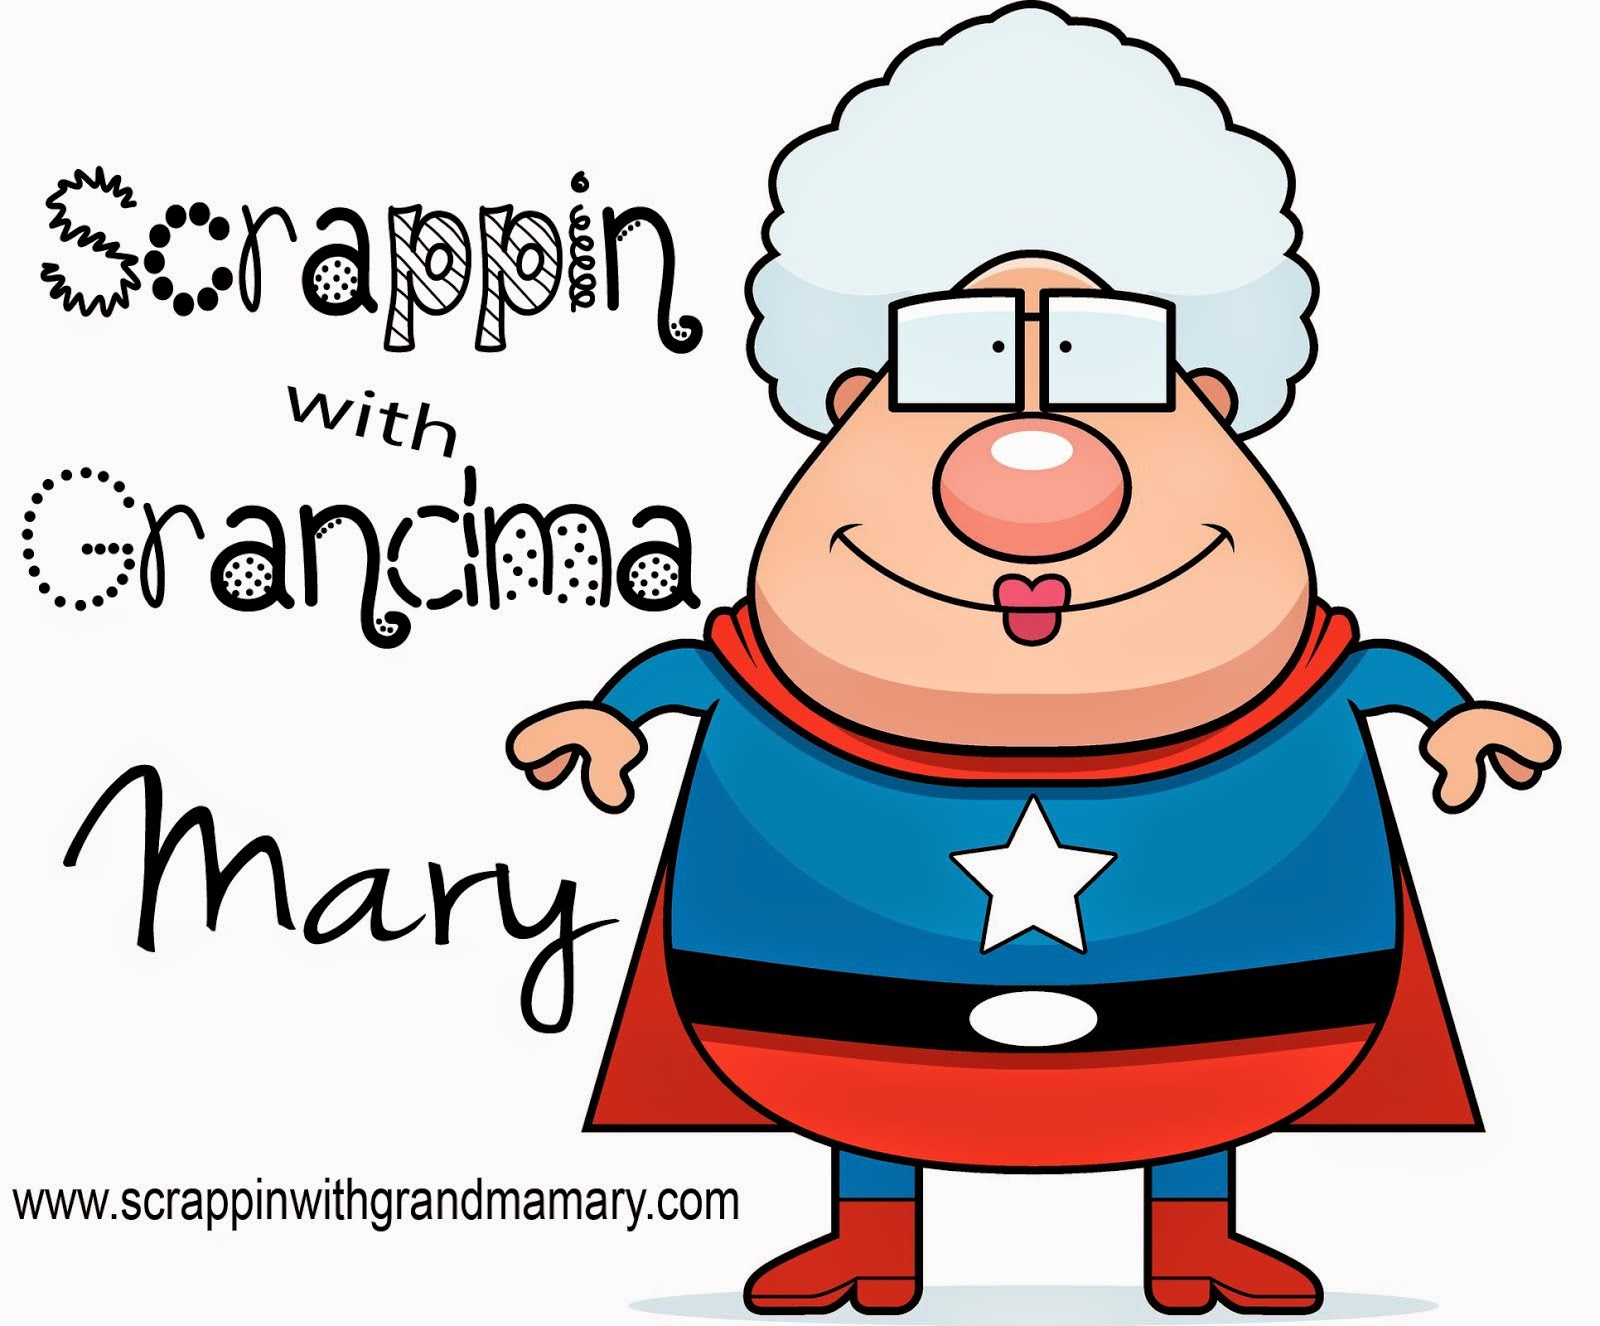 Scrappin' With Grandma Mary